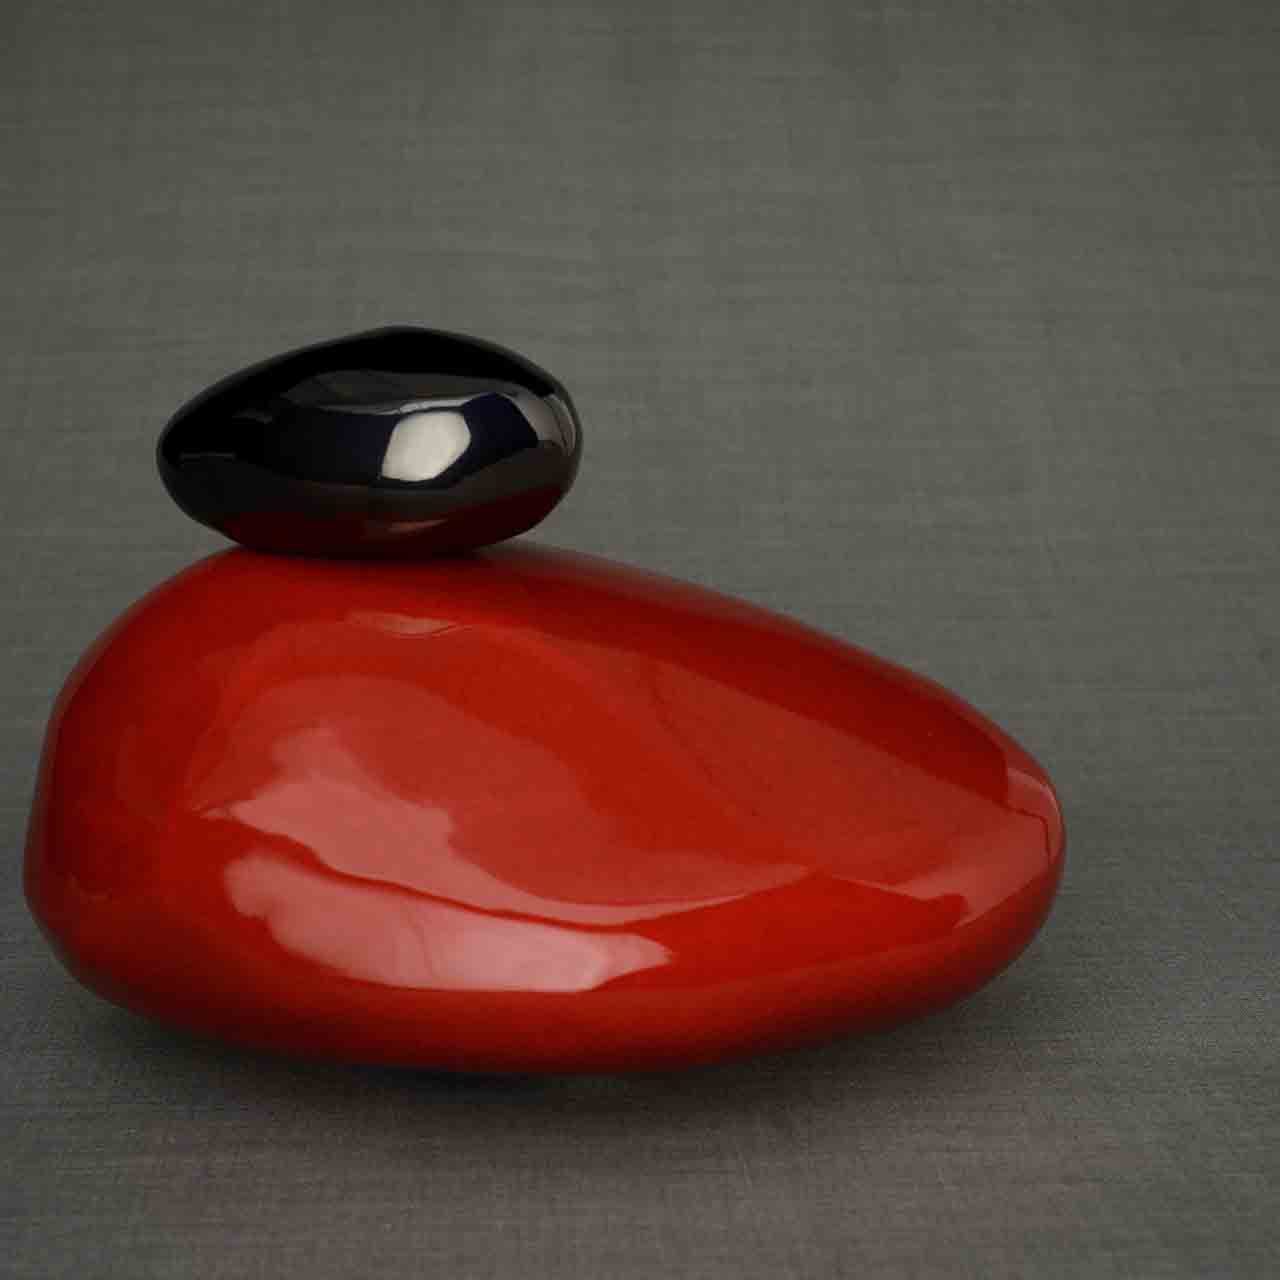 Pebbles Adult Cremation Urn for Ashes in Red and Black